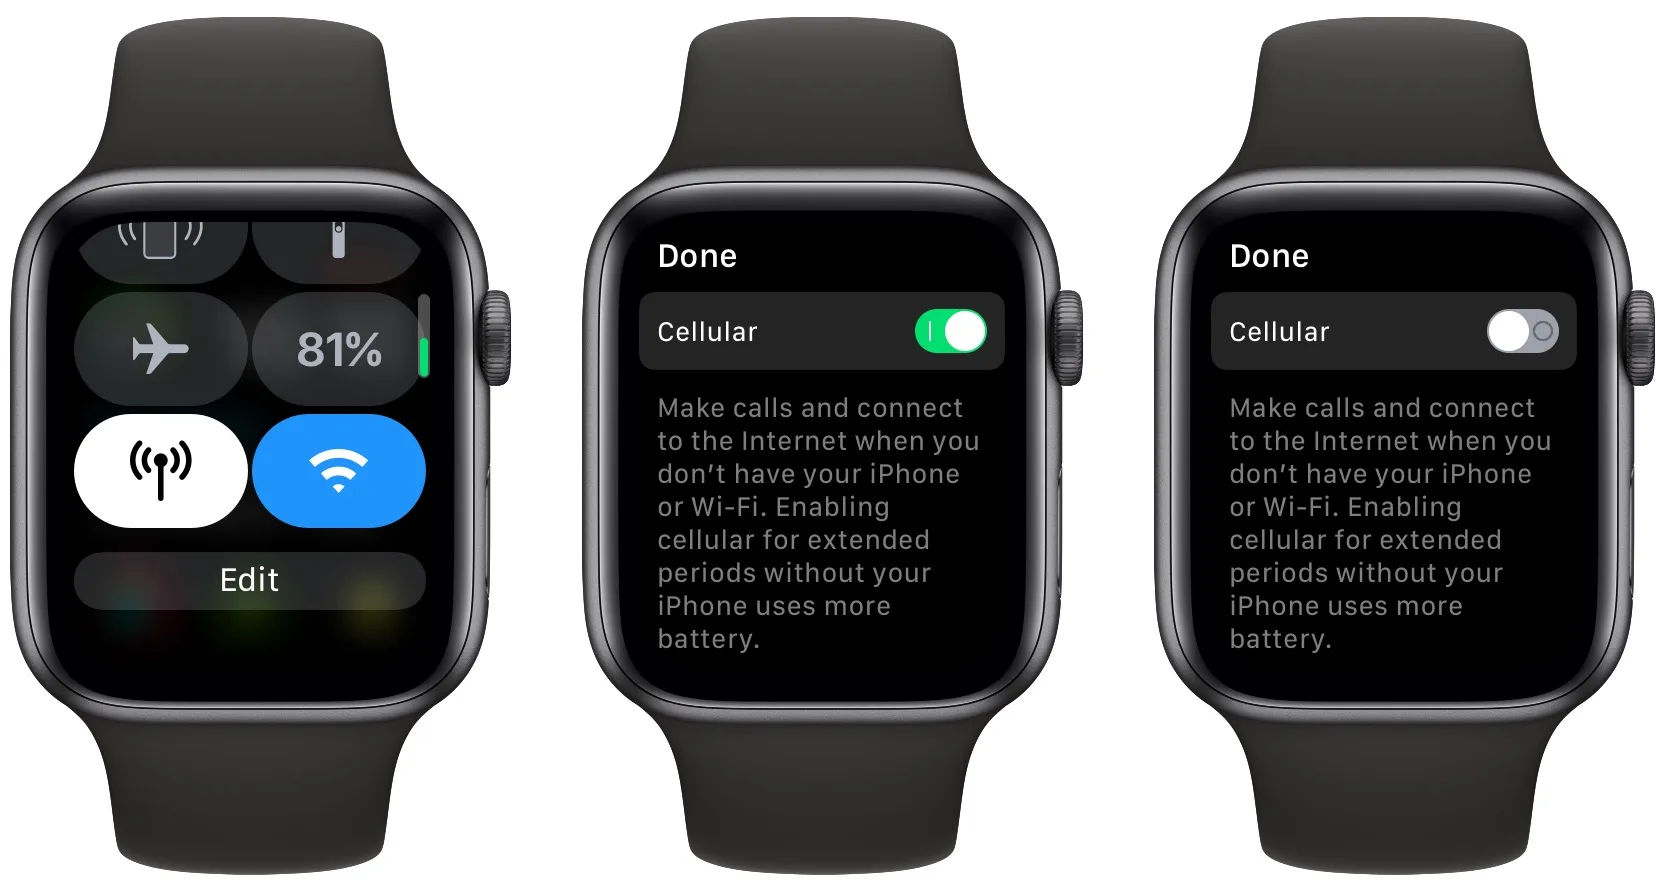 How Does Cellular Work On Apple Watch